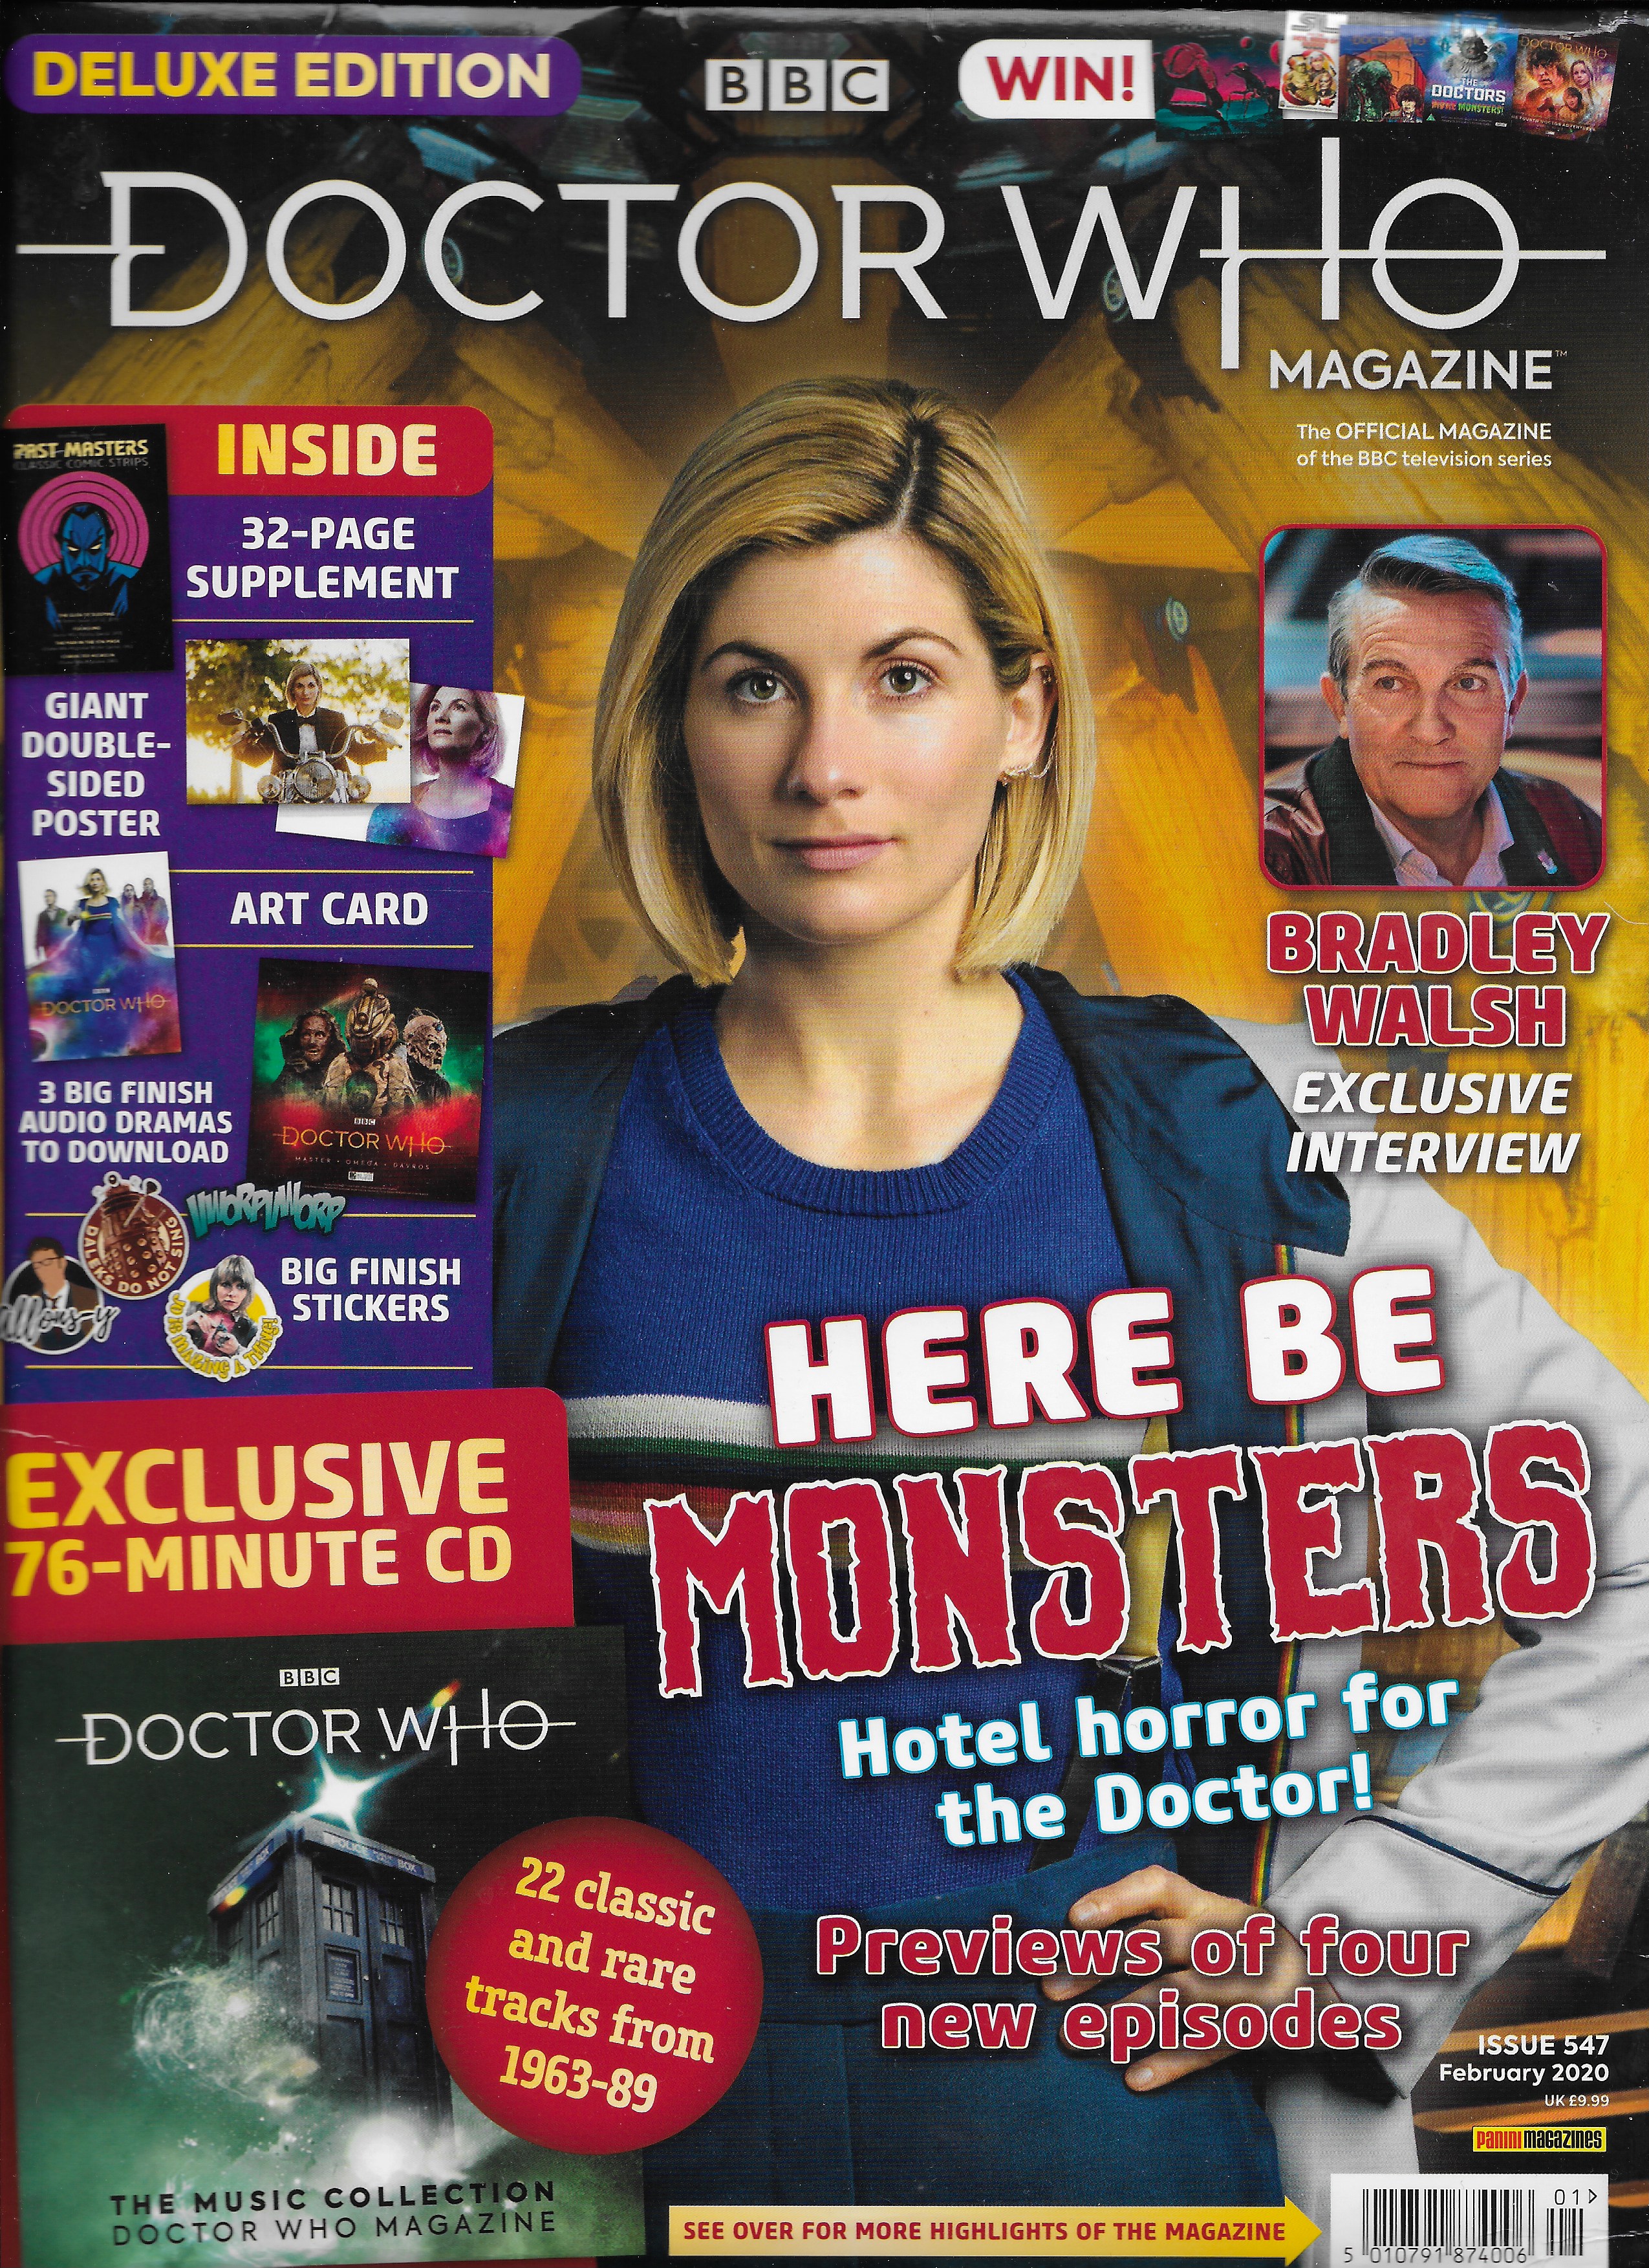 Picture of 5 010791 874006 01 Doctor Who magazine - Issue 547 by artist Various from the BBC records and Tapes library